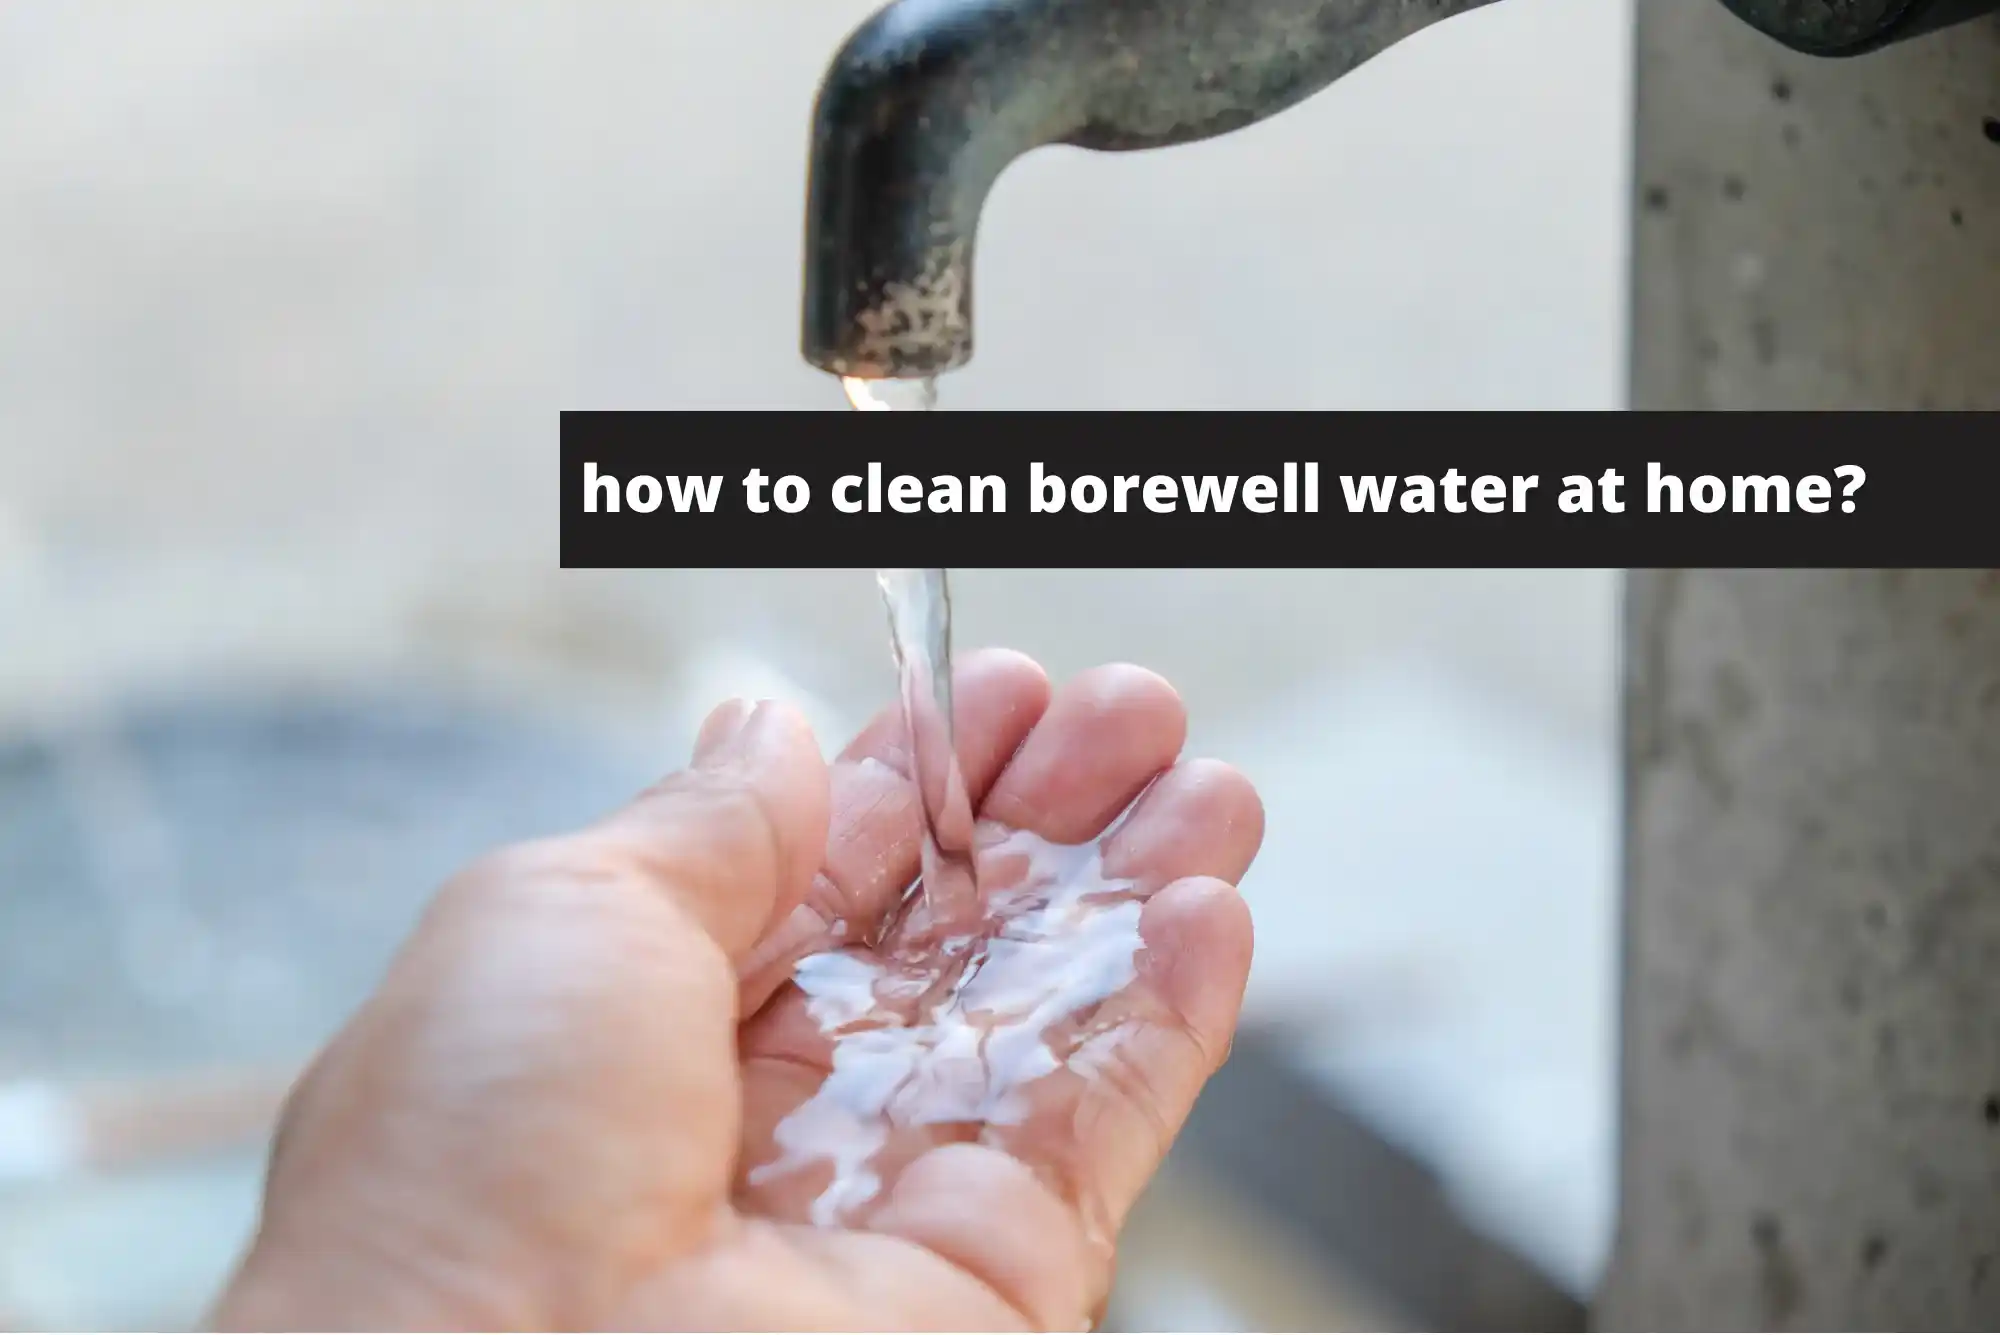 how to clean borewell water at home?